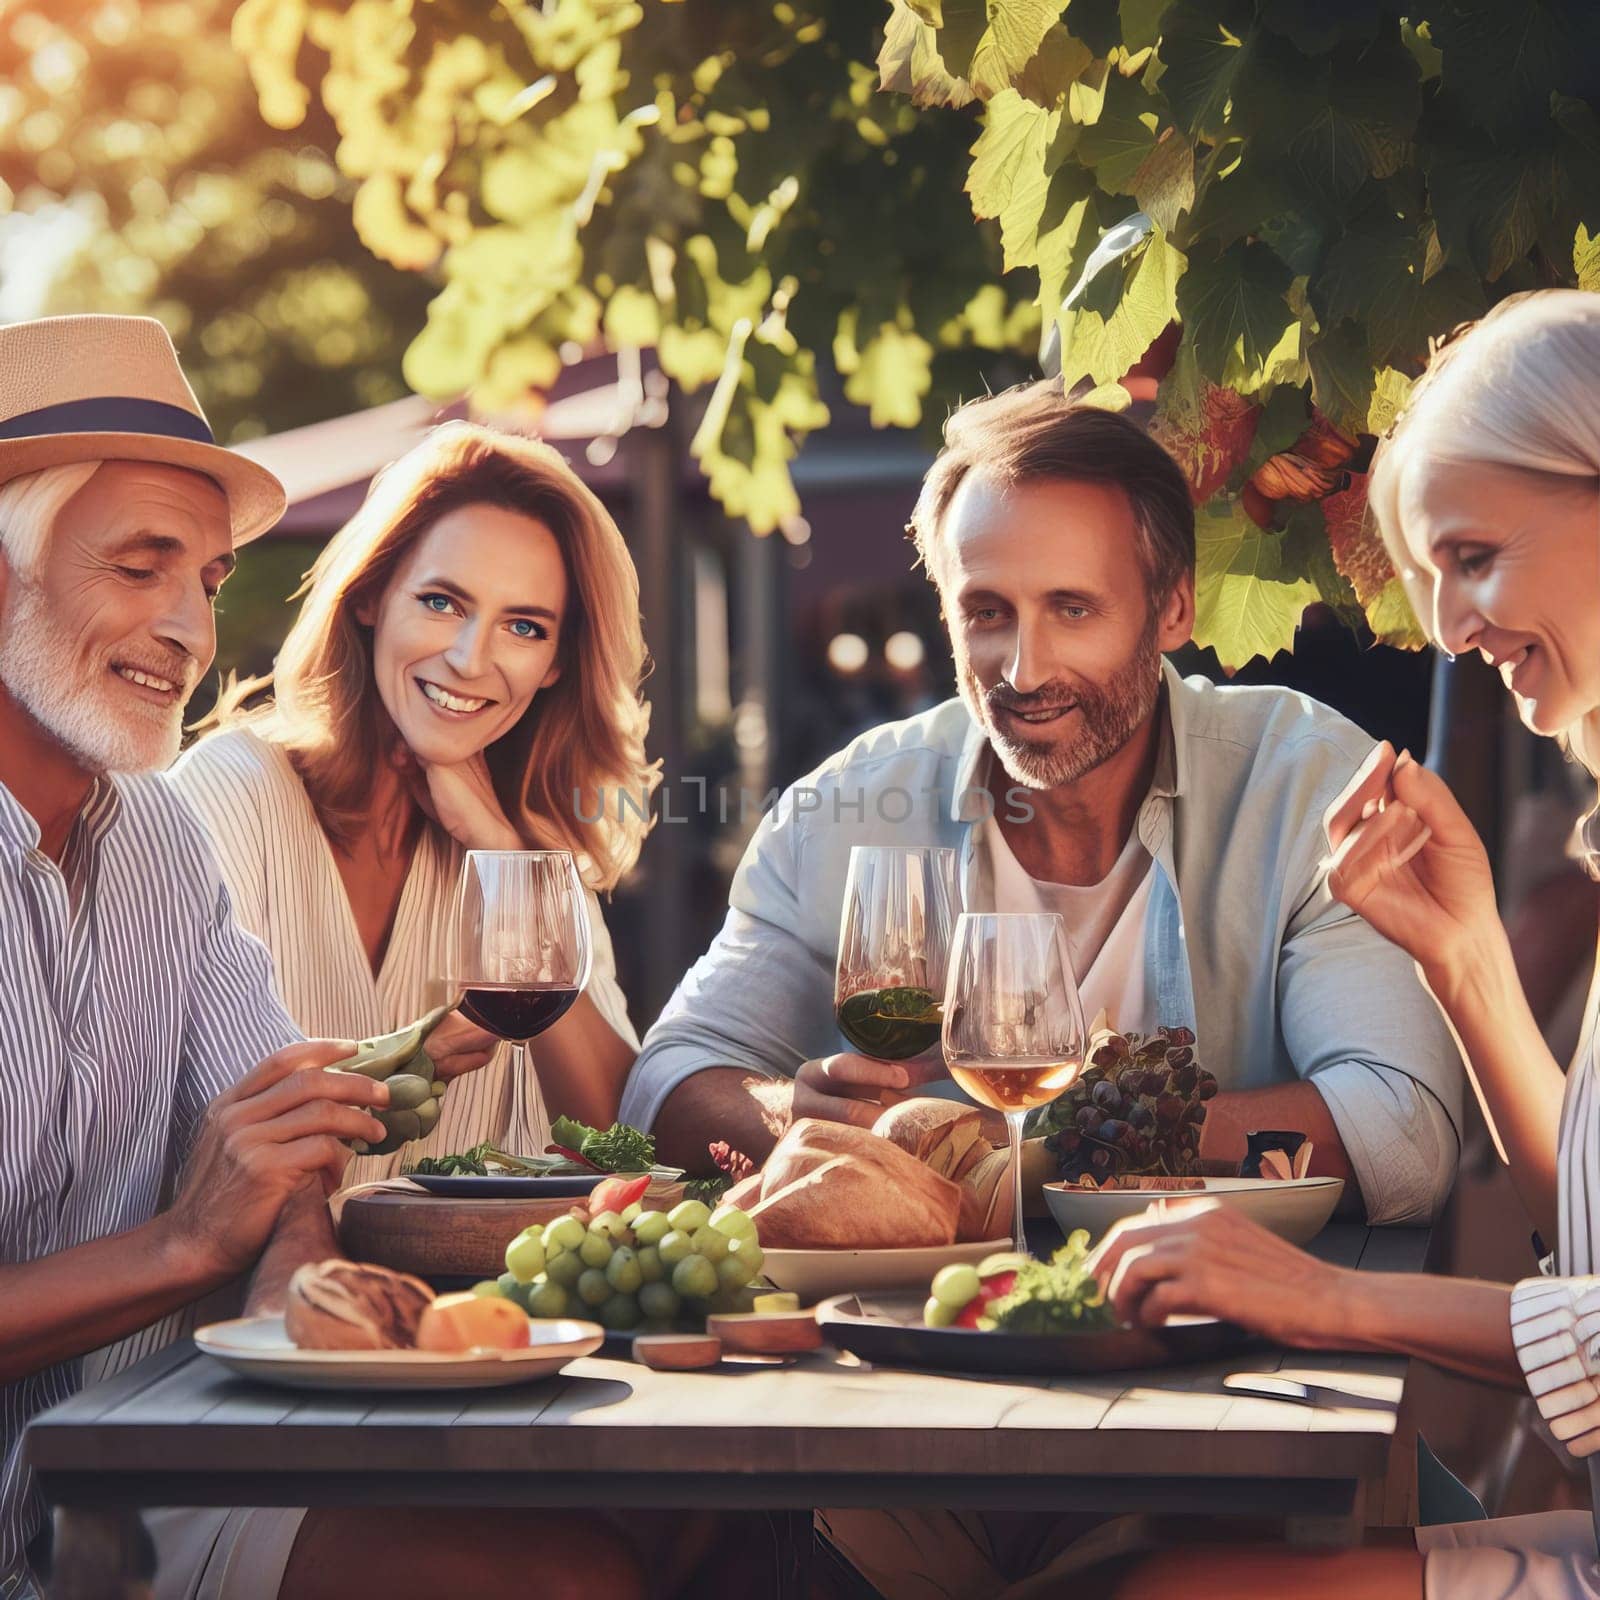 A group of people enjoying a meal and wine at an outdoor restaurant, backlit by the sun, creating a warm, summery atmosphere